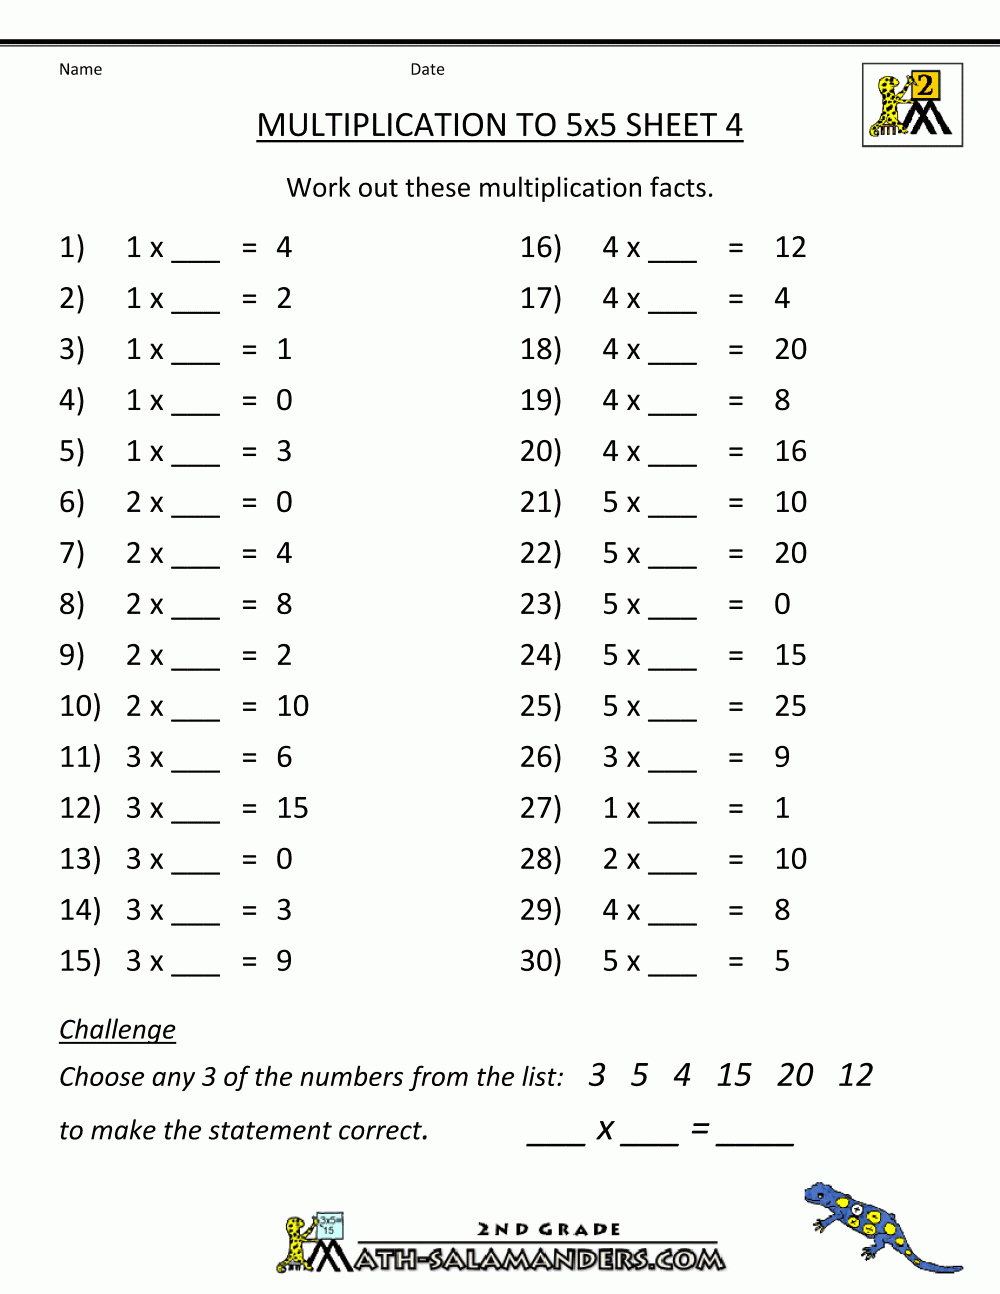 multiplication-tables-1-12-practice-sheet-times-tables-worksheets